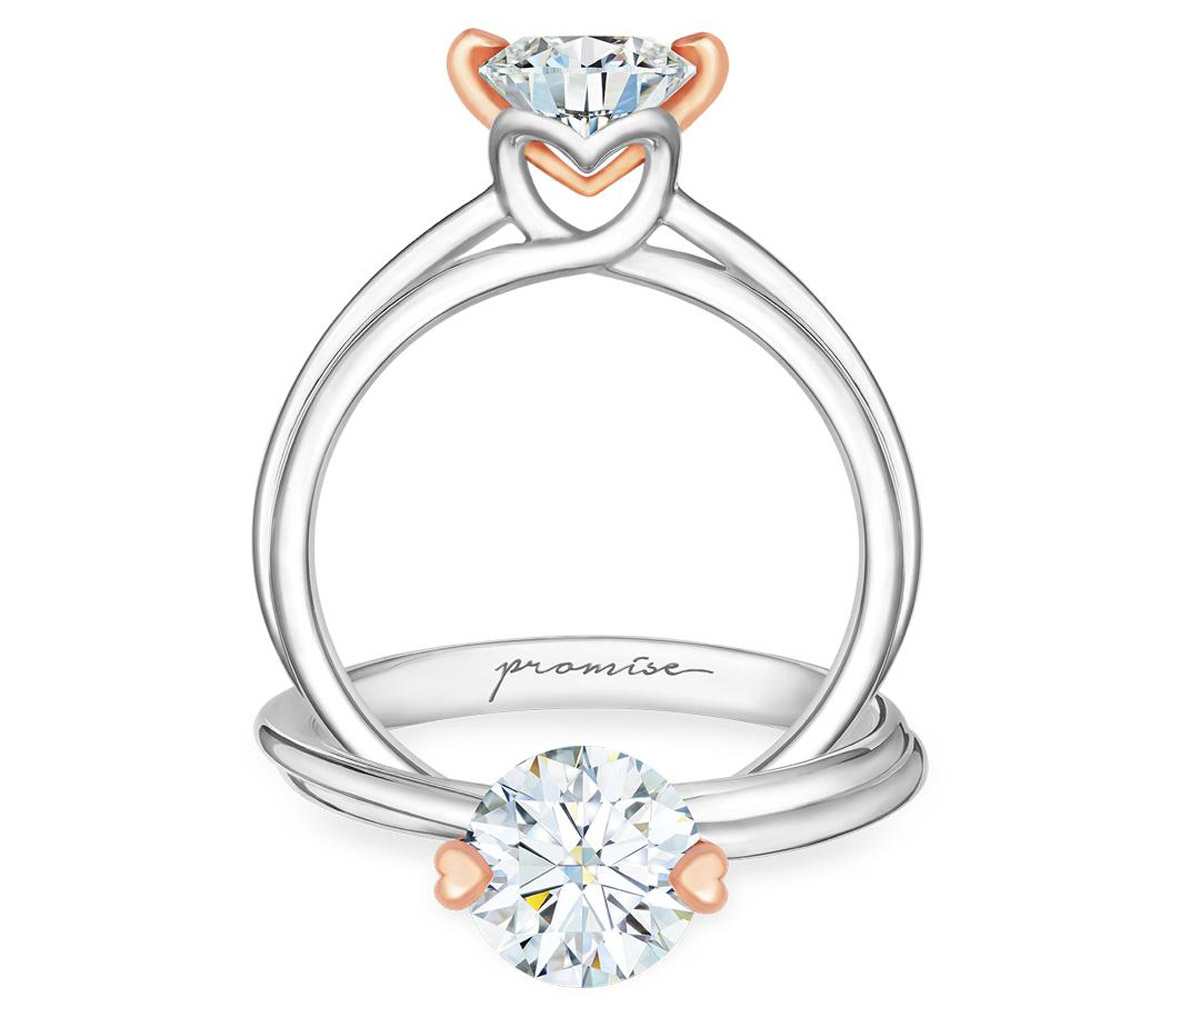 How to Choose the Perfect Engagement Ring in 4 Steps